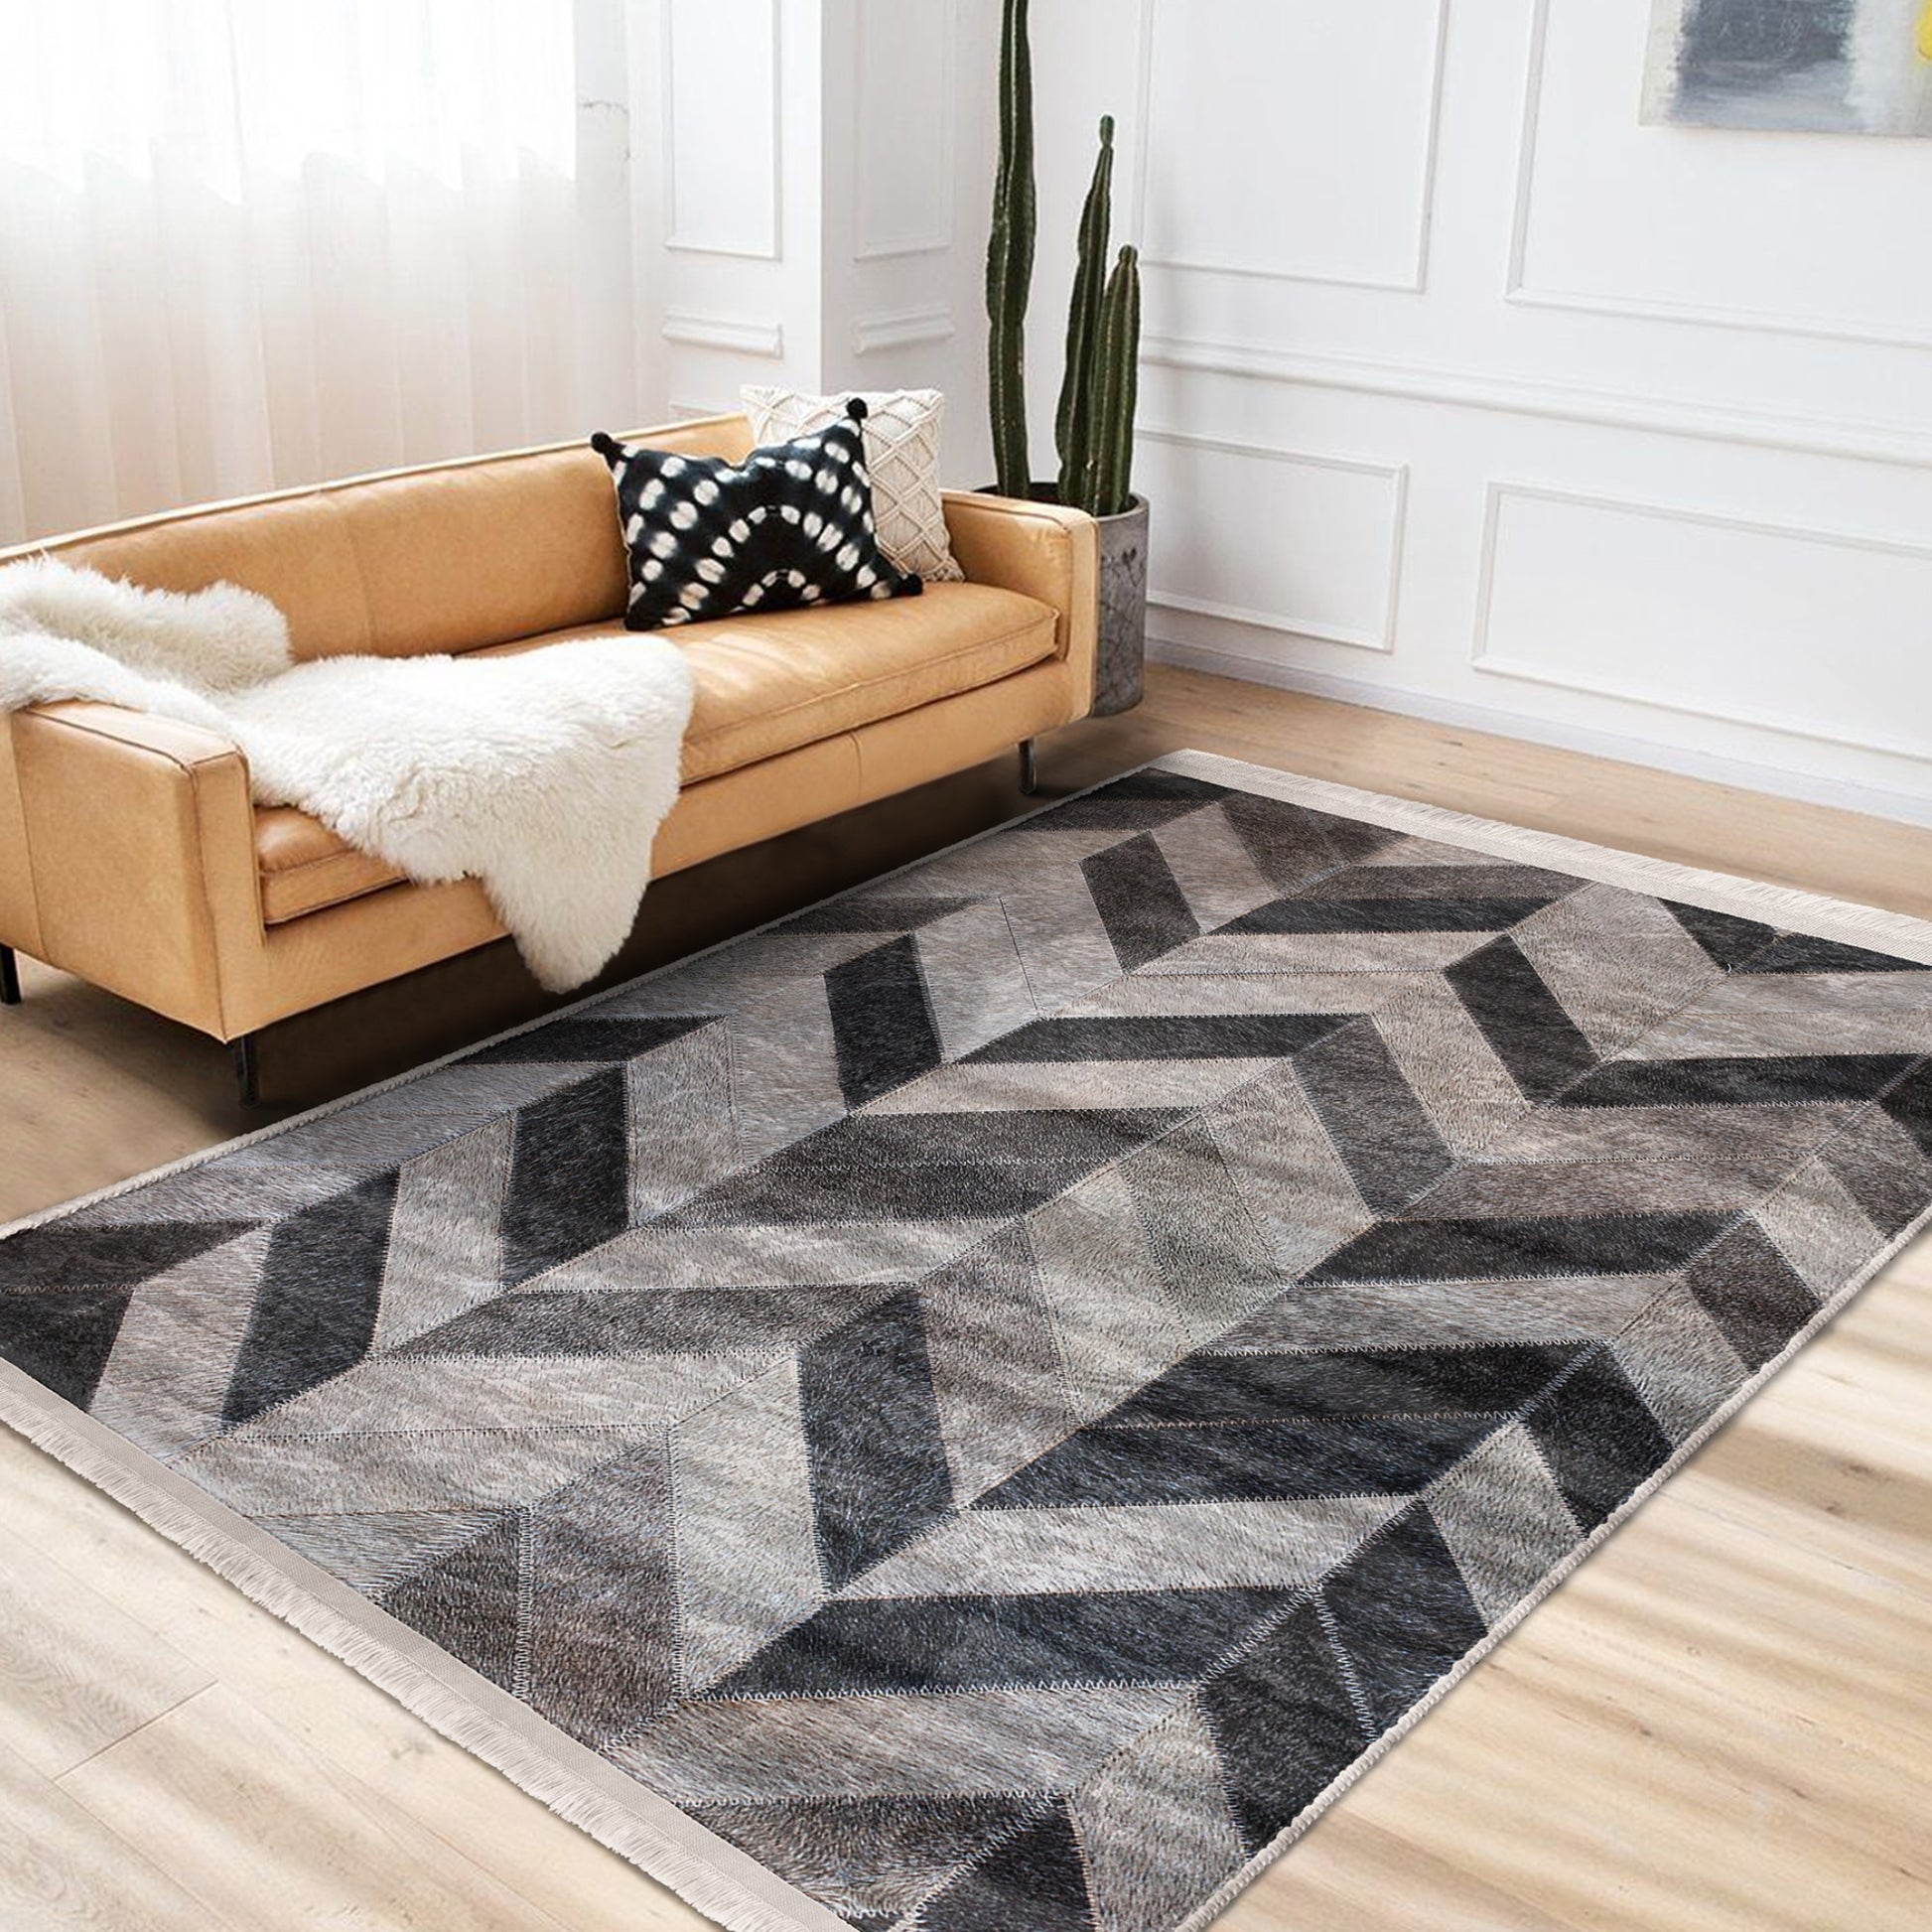 Grey Tones Patterned Area Rug for a Touch of Subtle Elegance